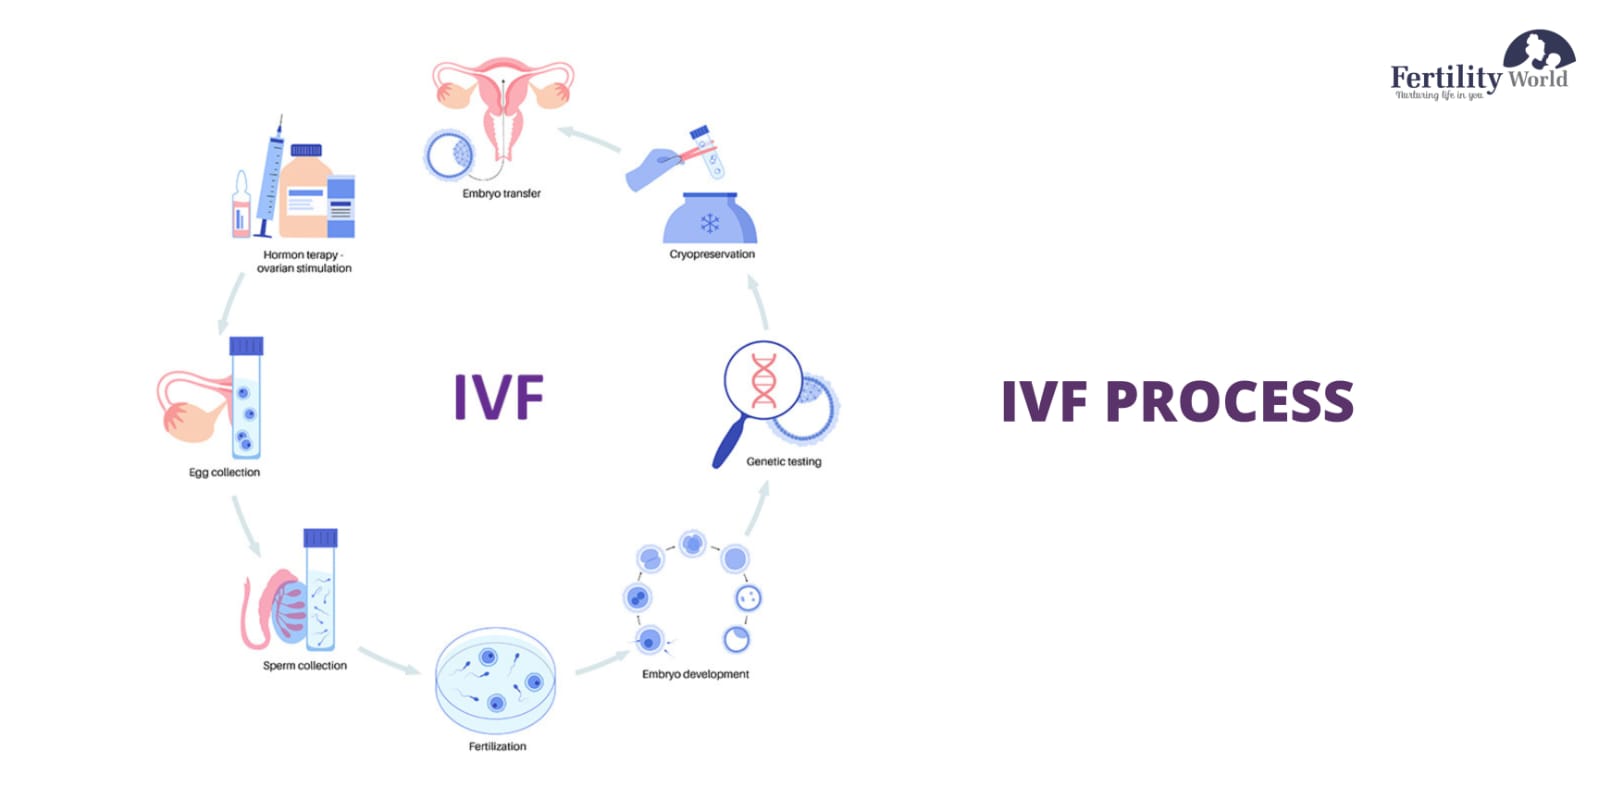 What is the process of IVF step by step?